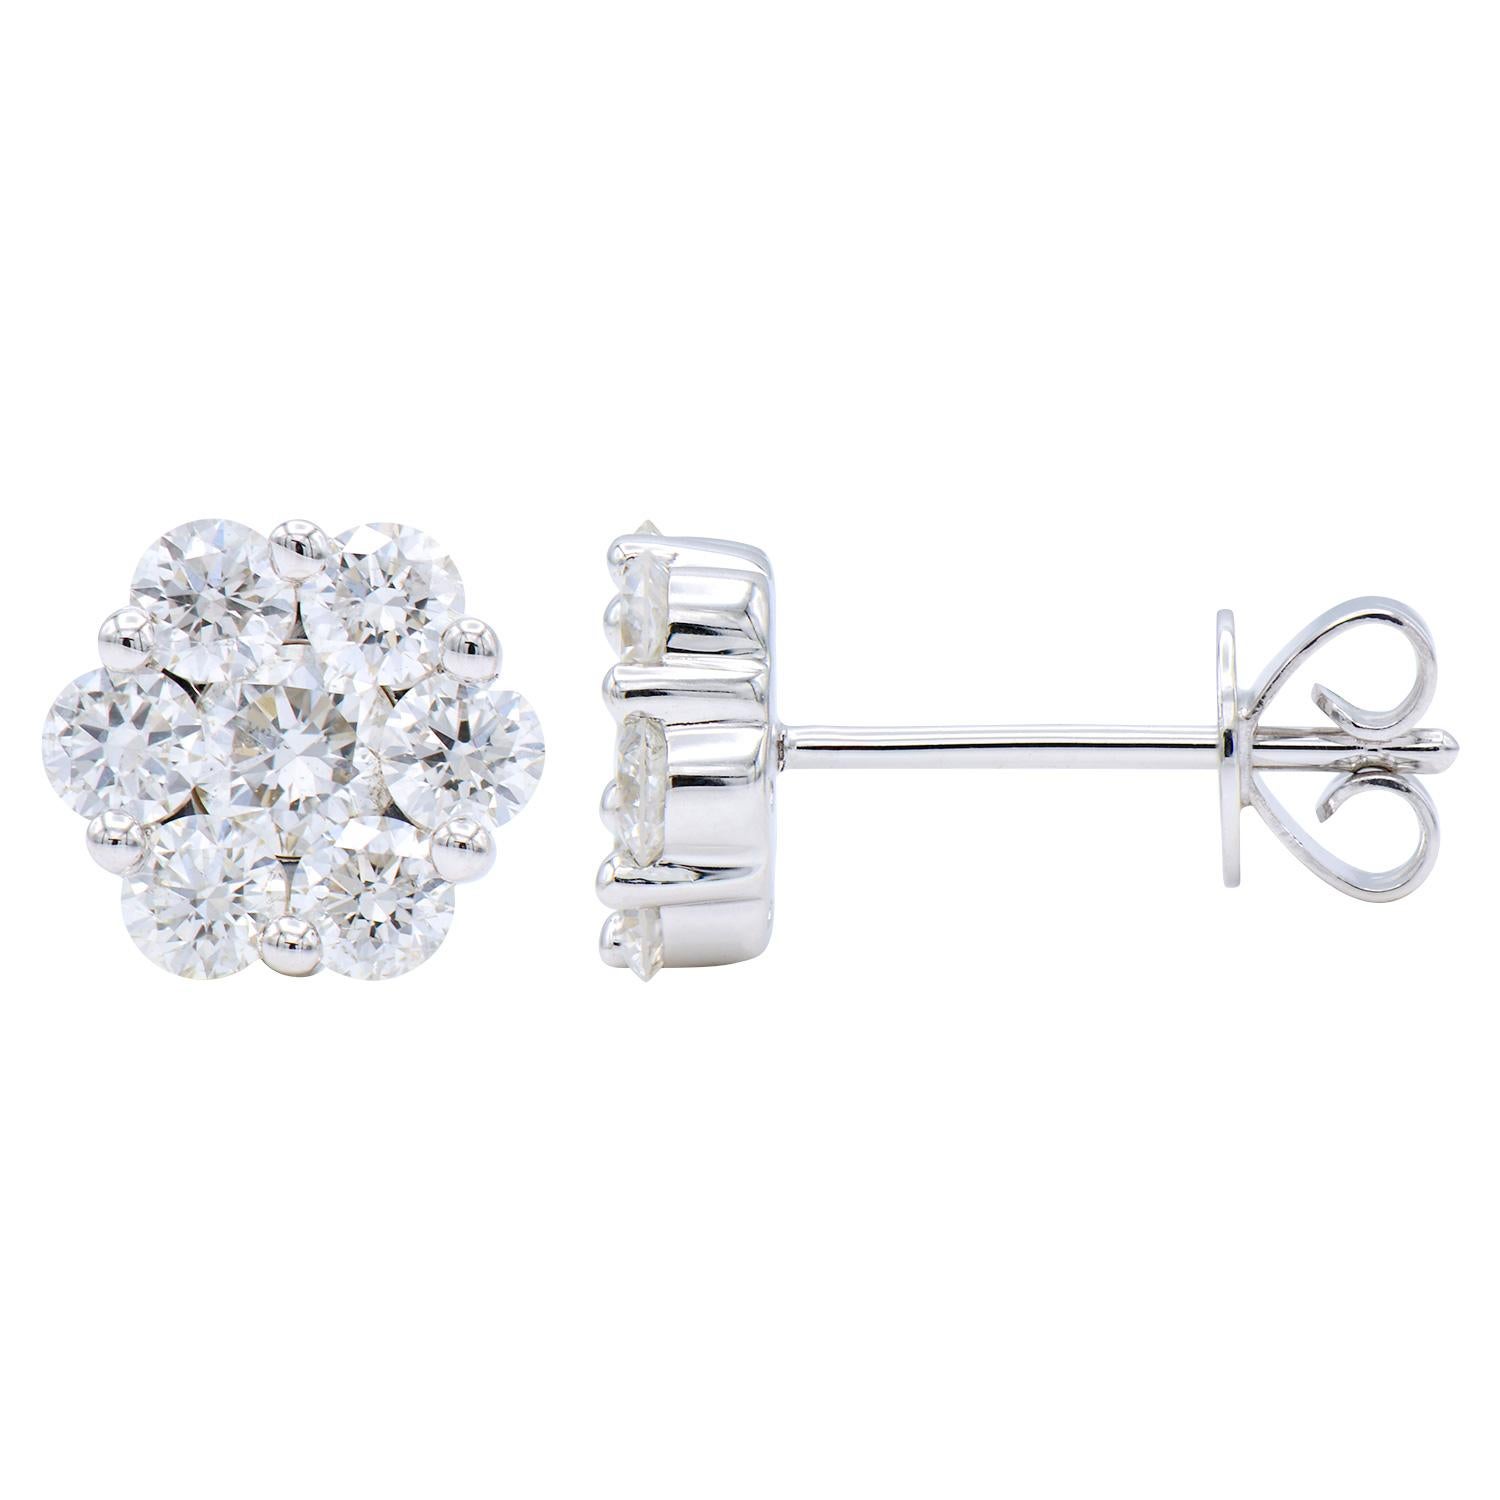 These stunning stud earrings are made with 1.6 grams of 14 karat white gold and contain 14 round diamonds. The diamonds are VS2, G color, and have a total carat weight of 1.04 ct. These are stud earrings that have a push back with an extra notch for